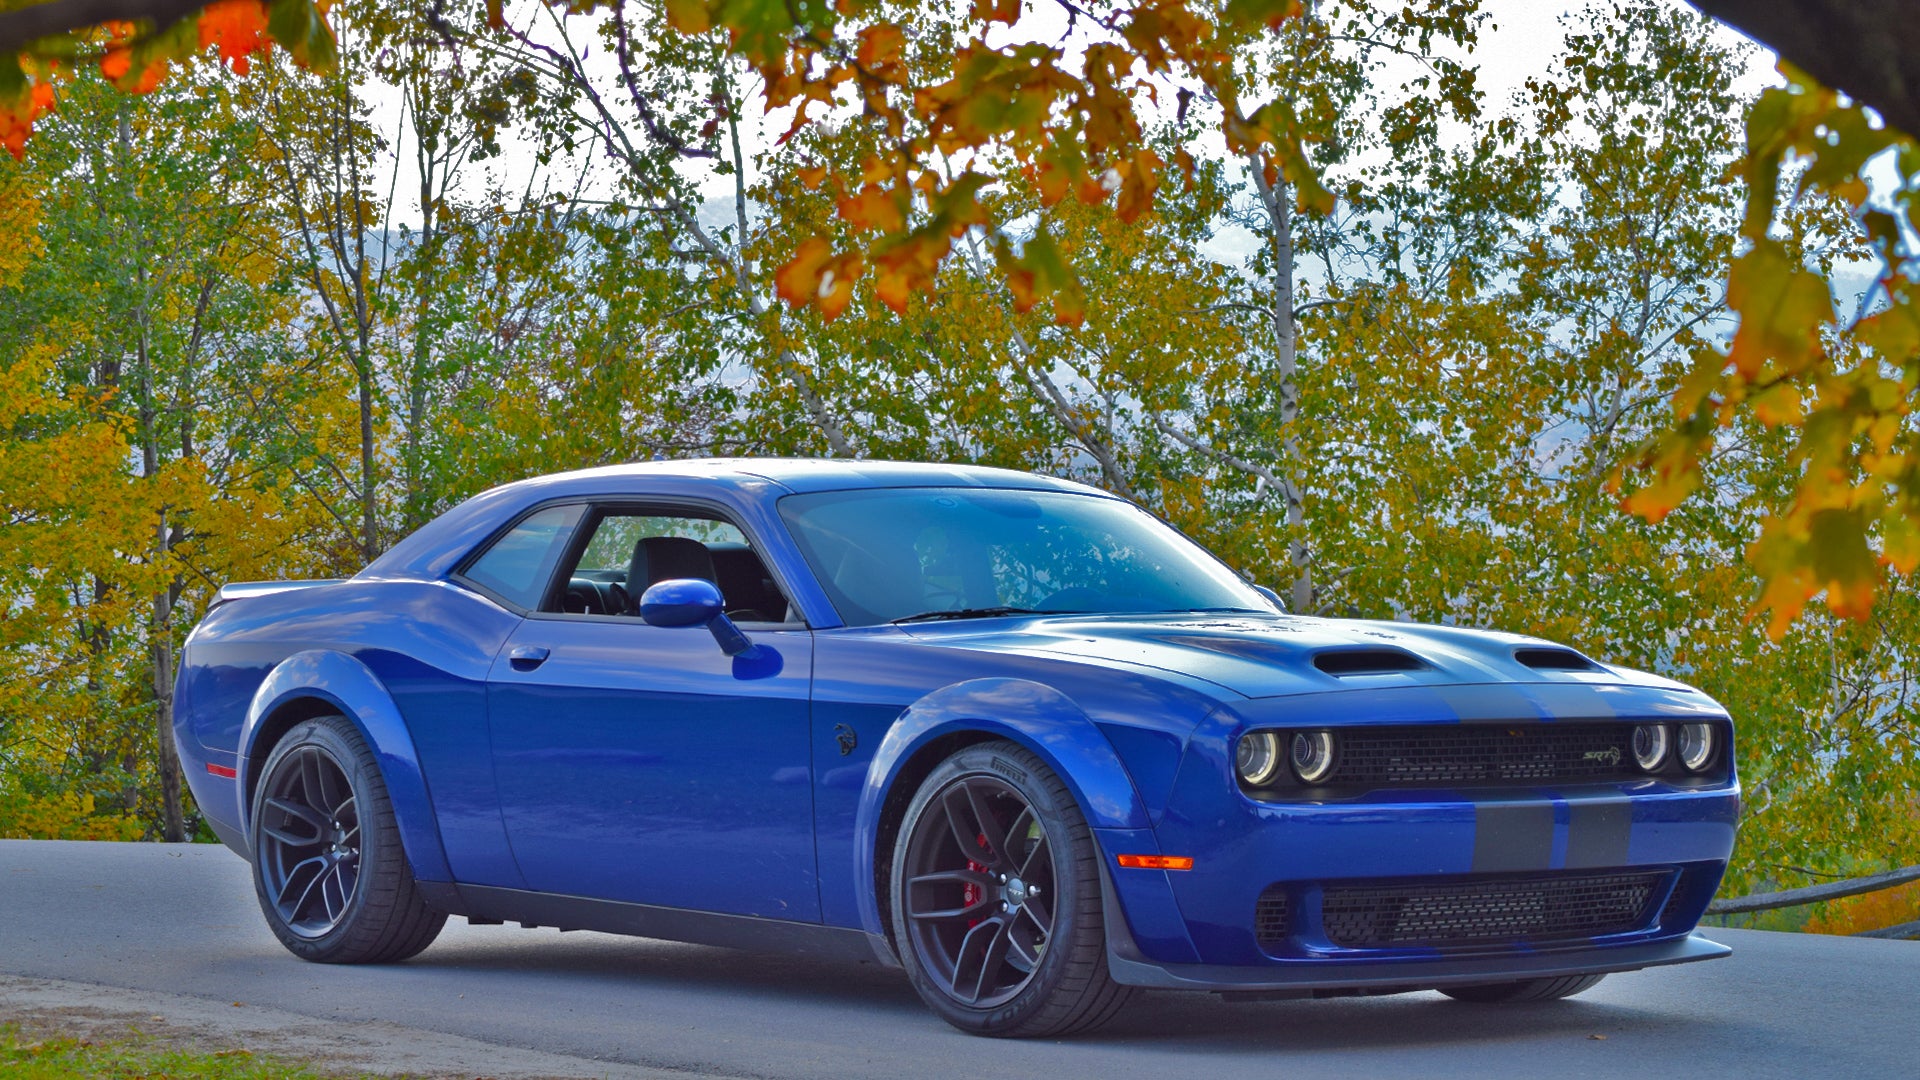 2019 Dodge Challenger SRT Hellcat Redeye Test Drive Review: The Jack  Reacher of Muscle Cars